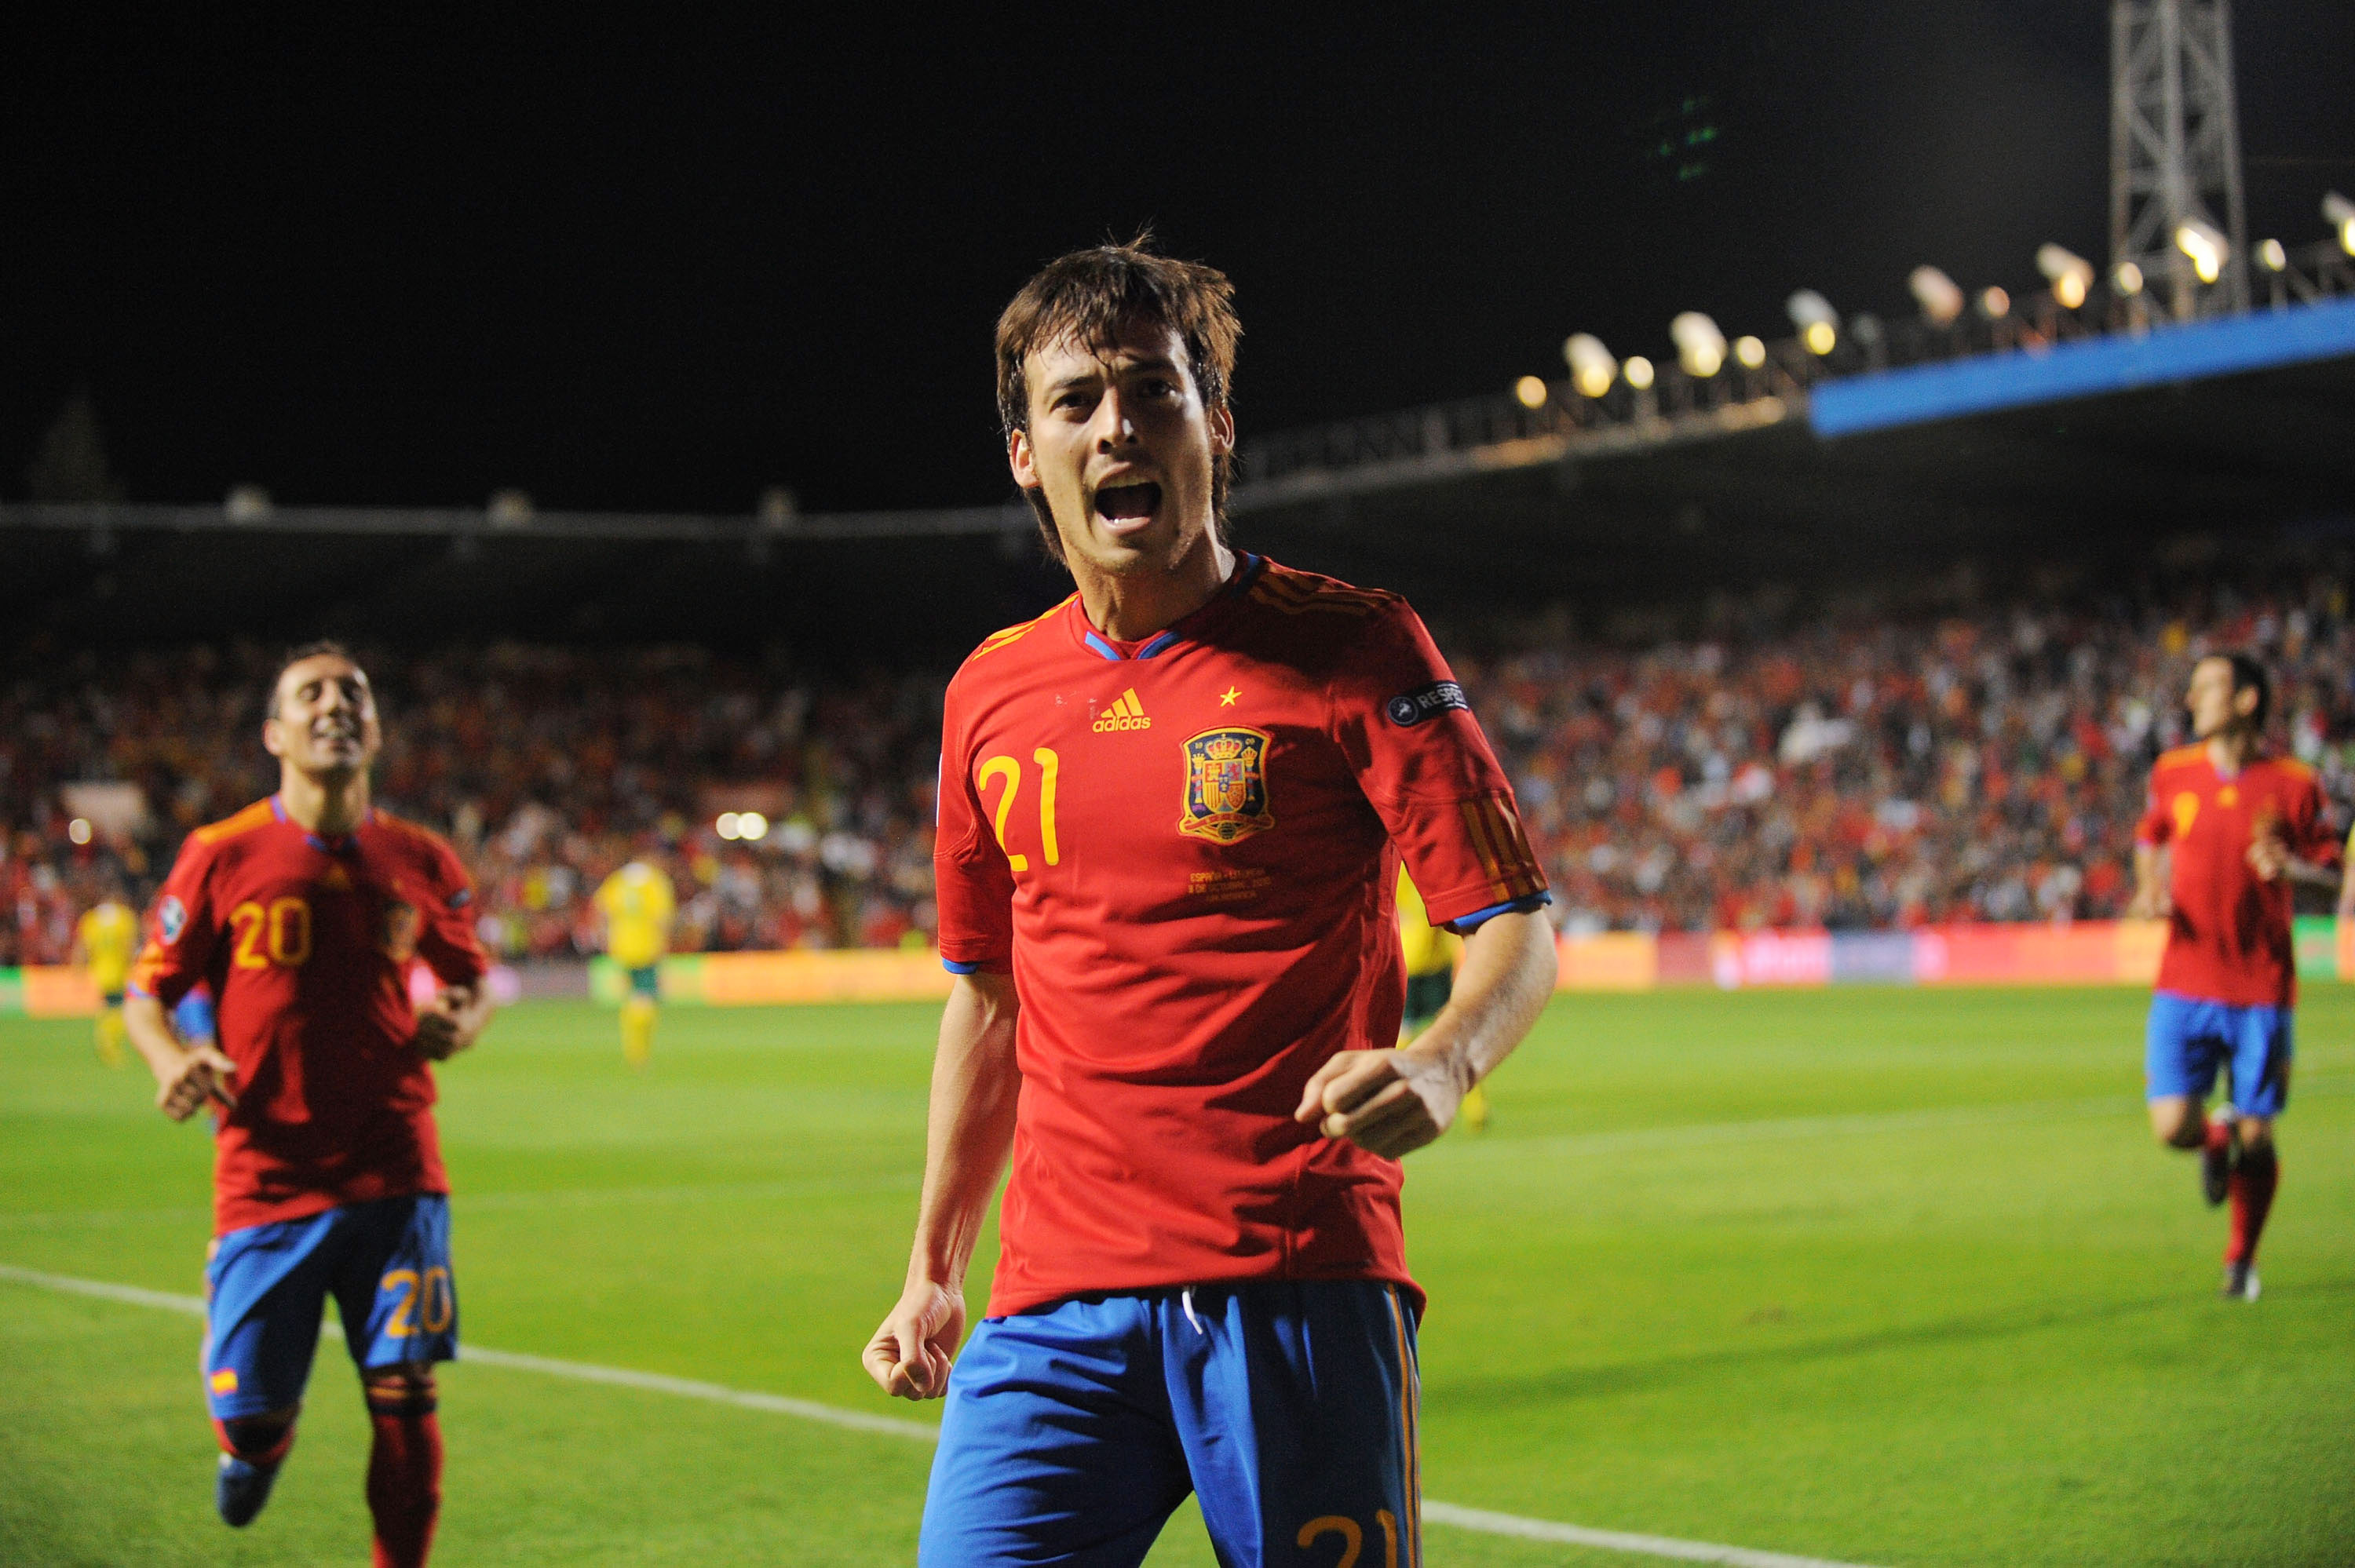 David Silva celebrates after scoring for Spain against Lithuania in 2010.